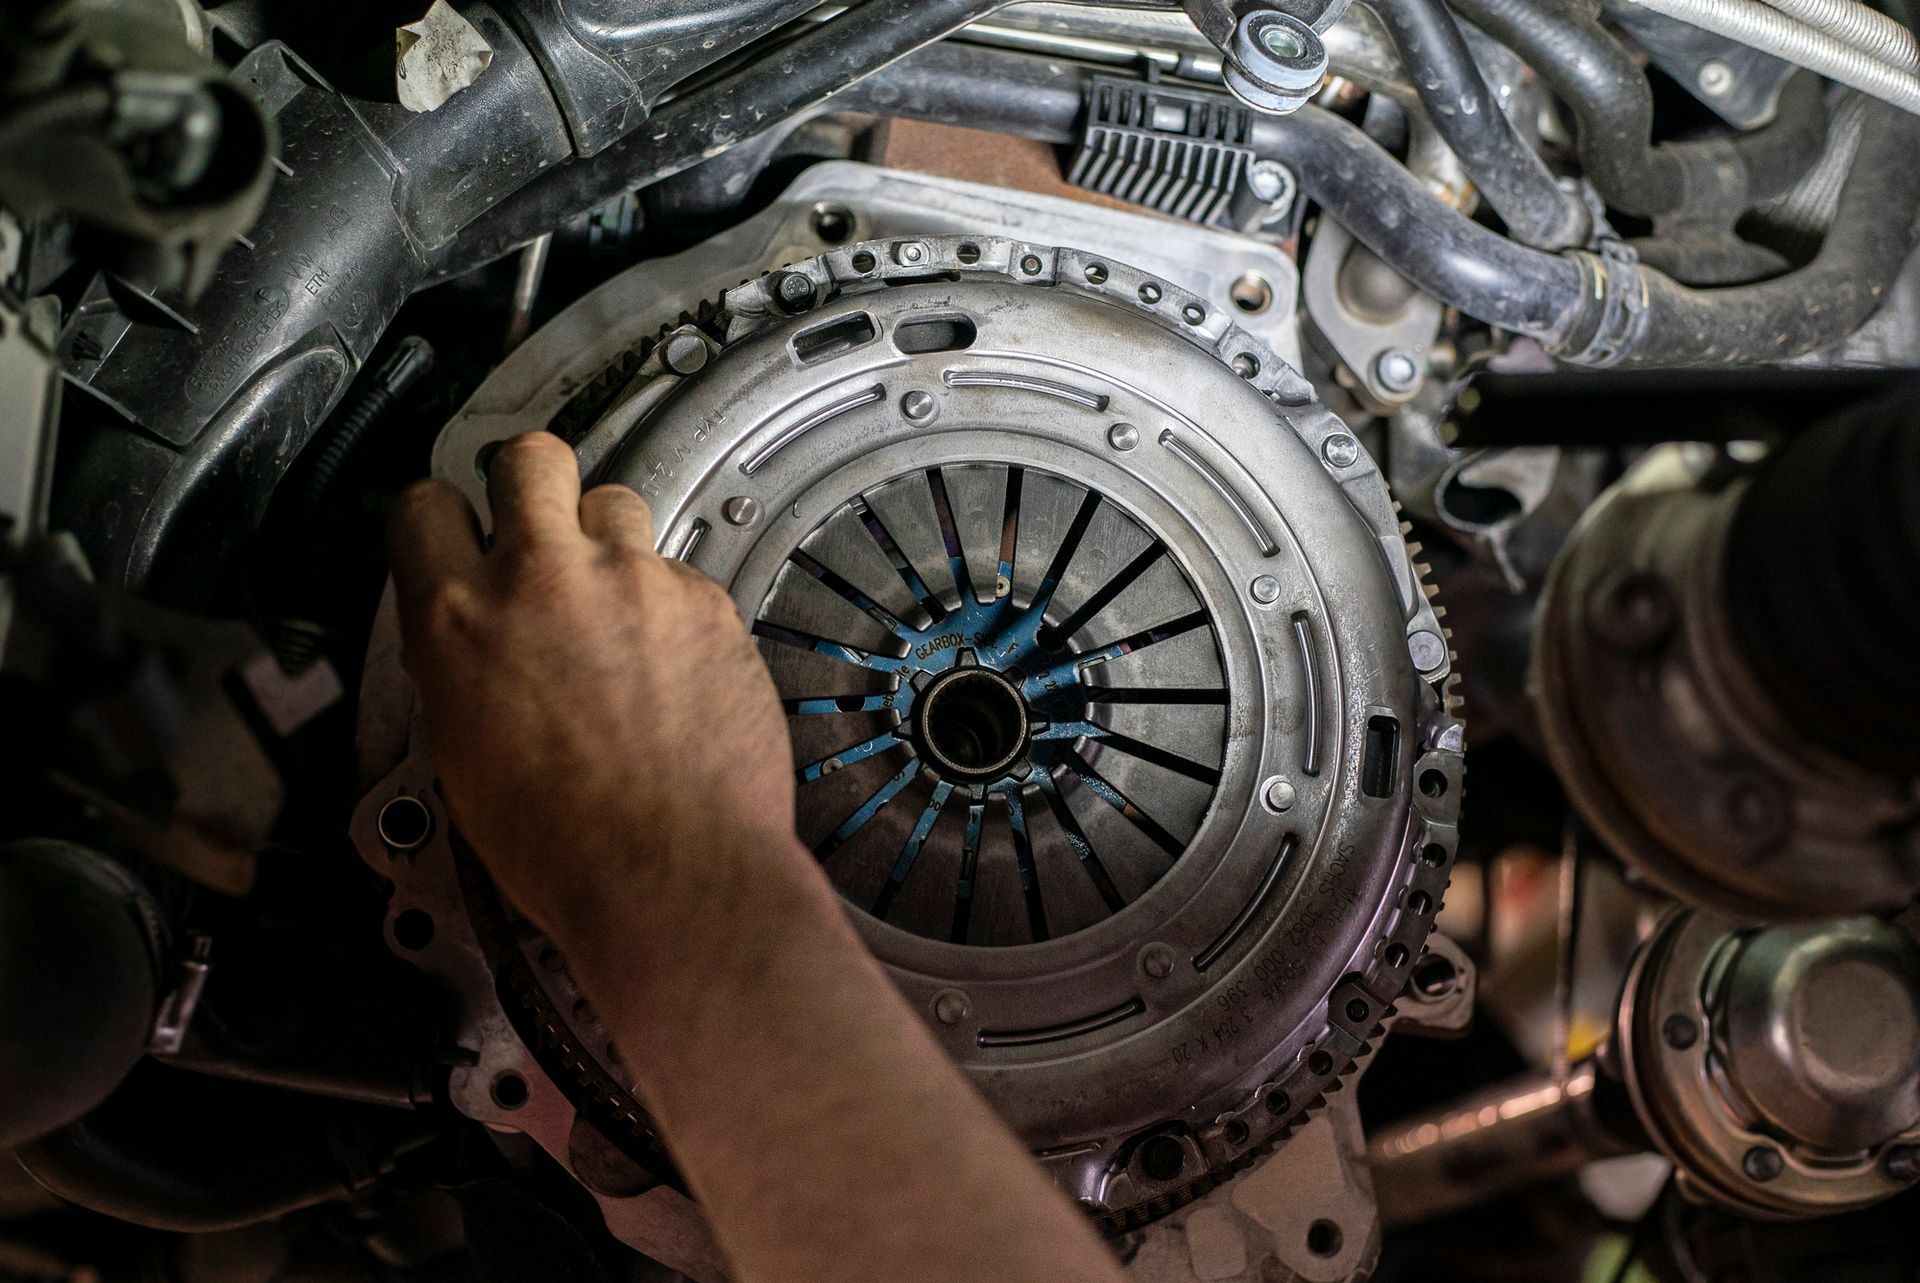 A person is fixing a clutch on a car engine.